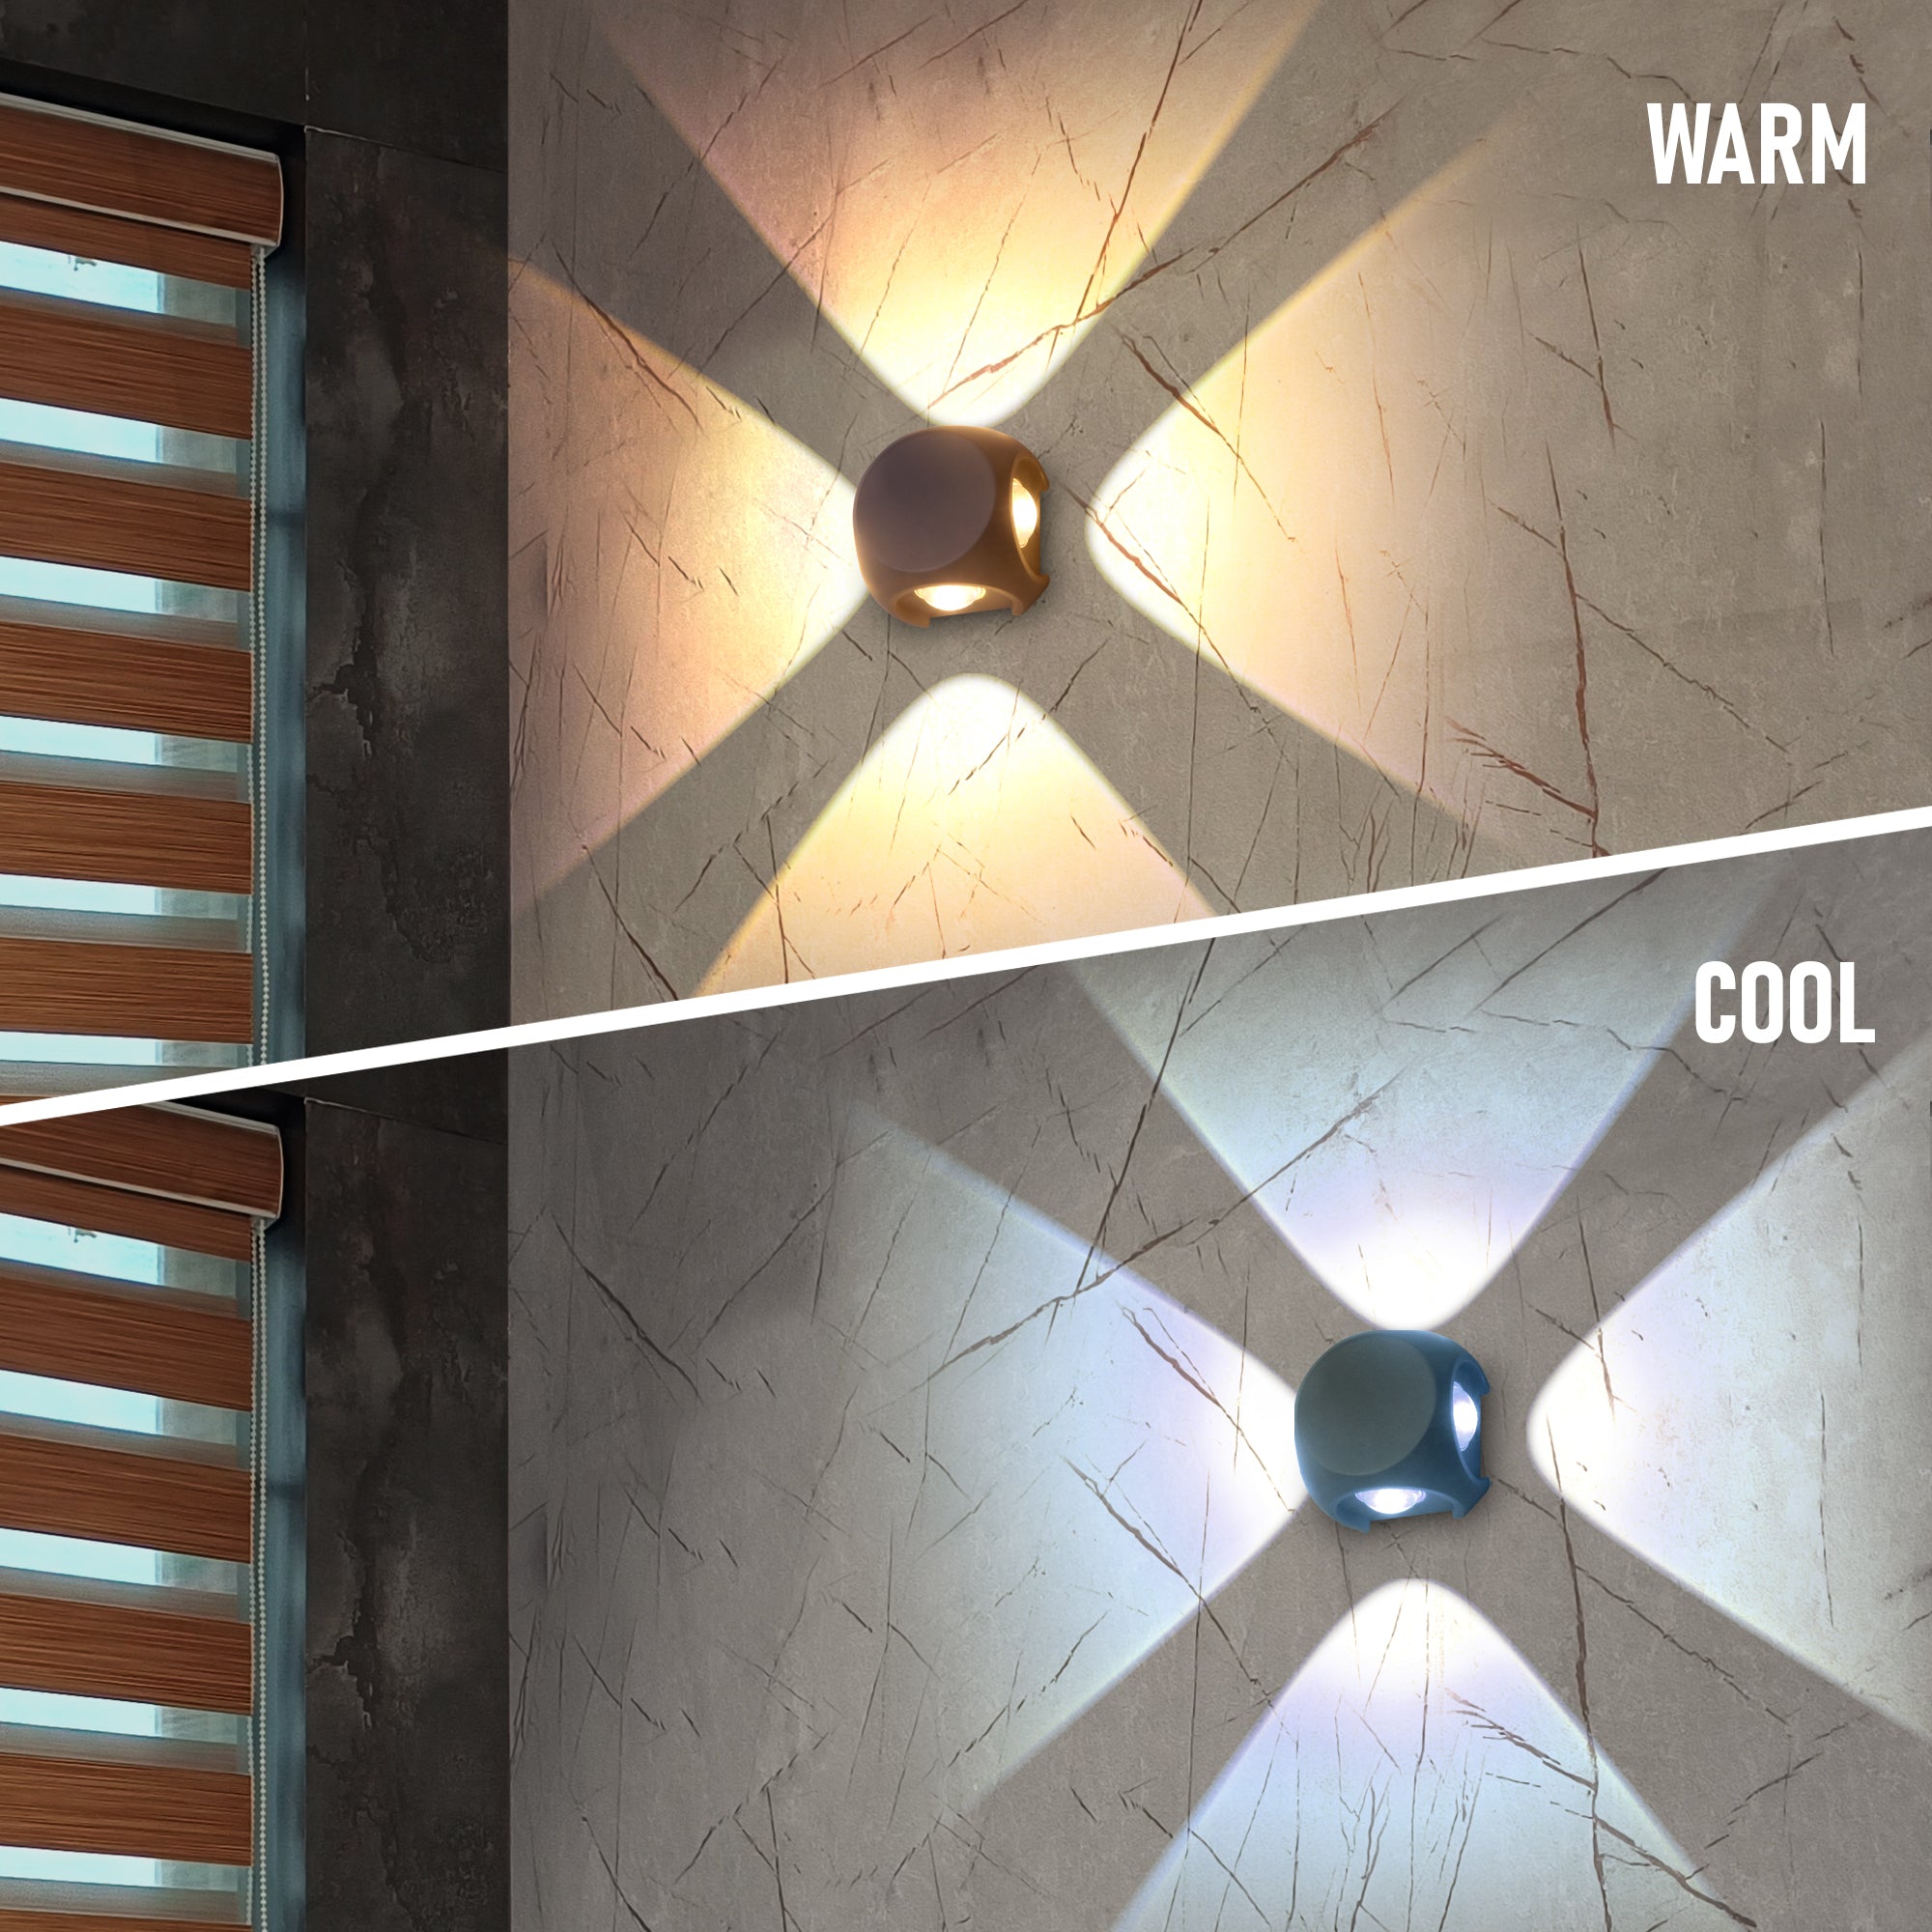 Cool and warm lighting comparison of Ignite 4 way led wall light #type_4 way